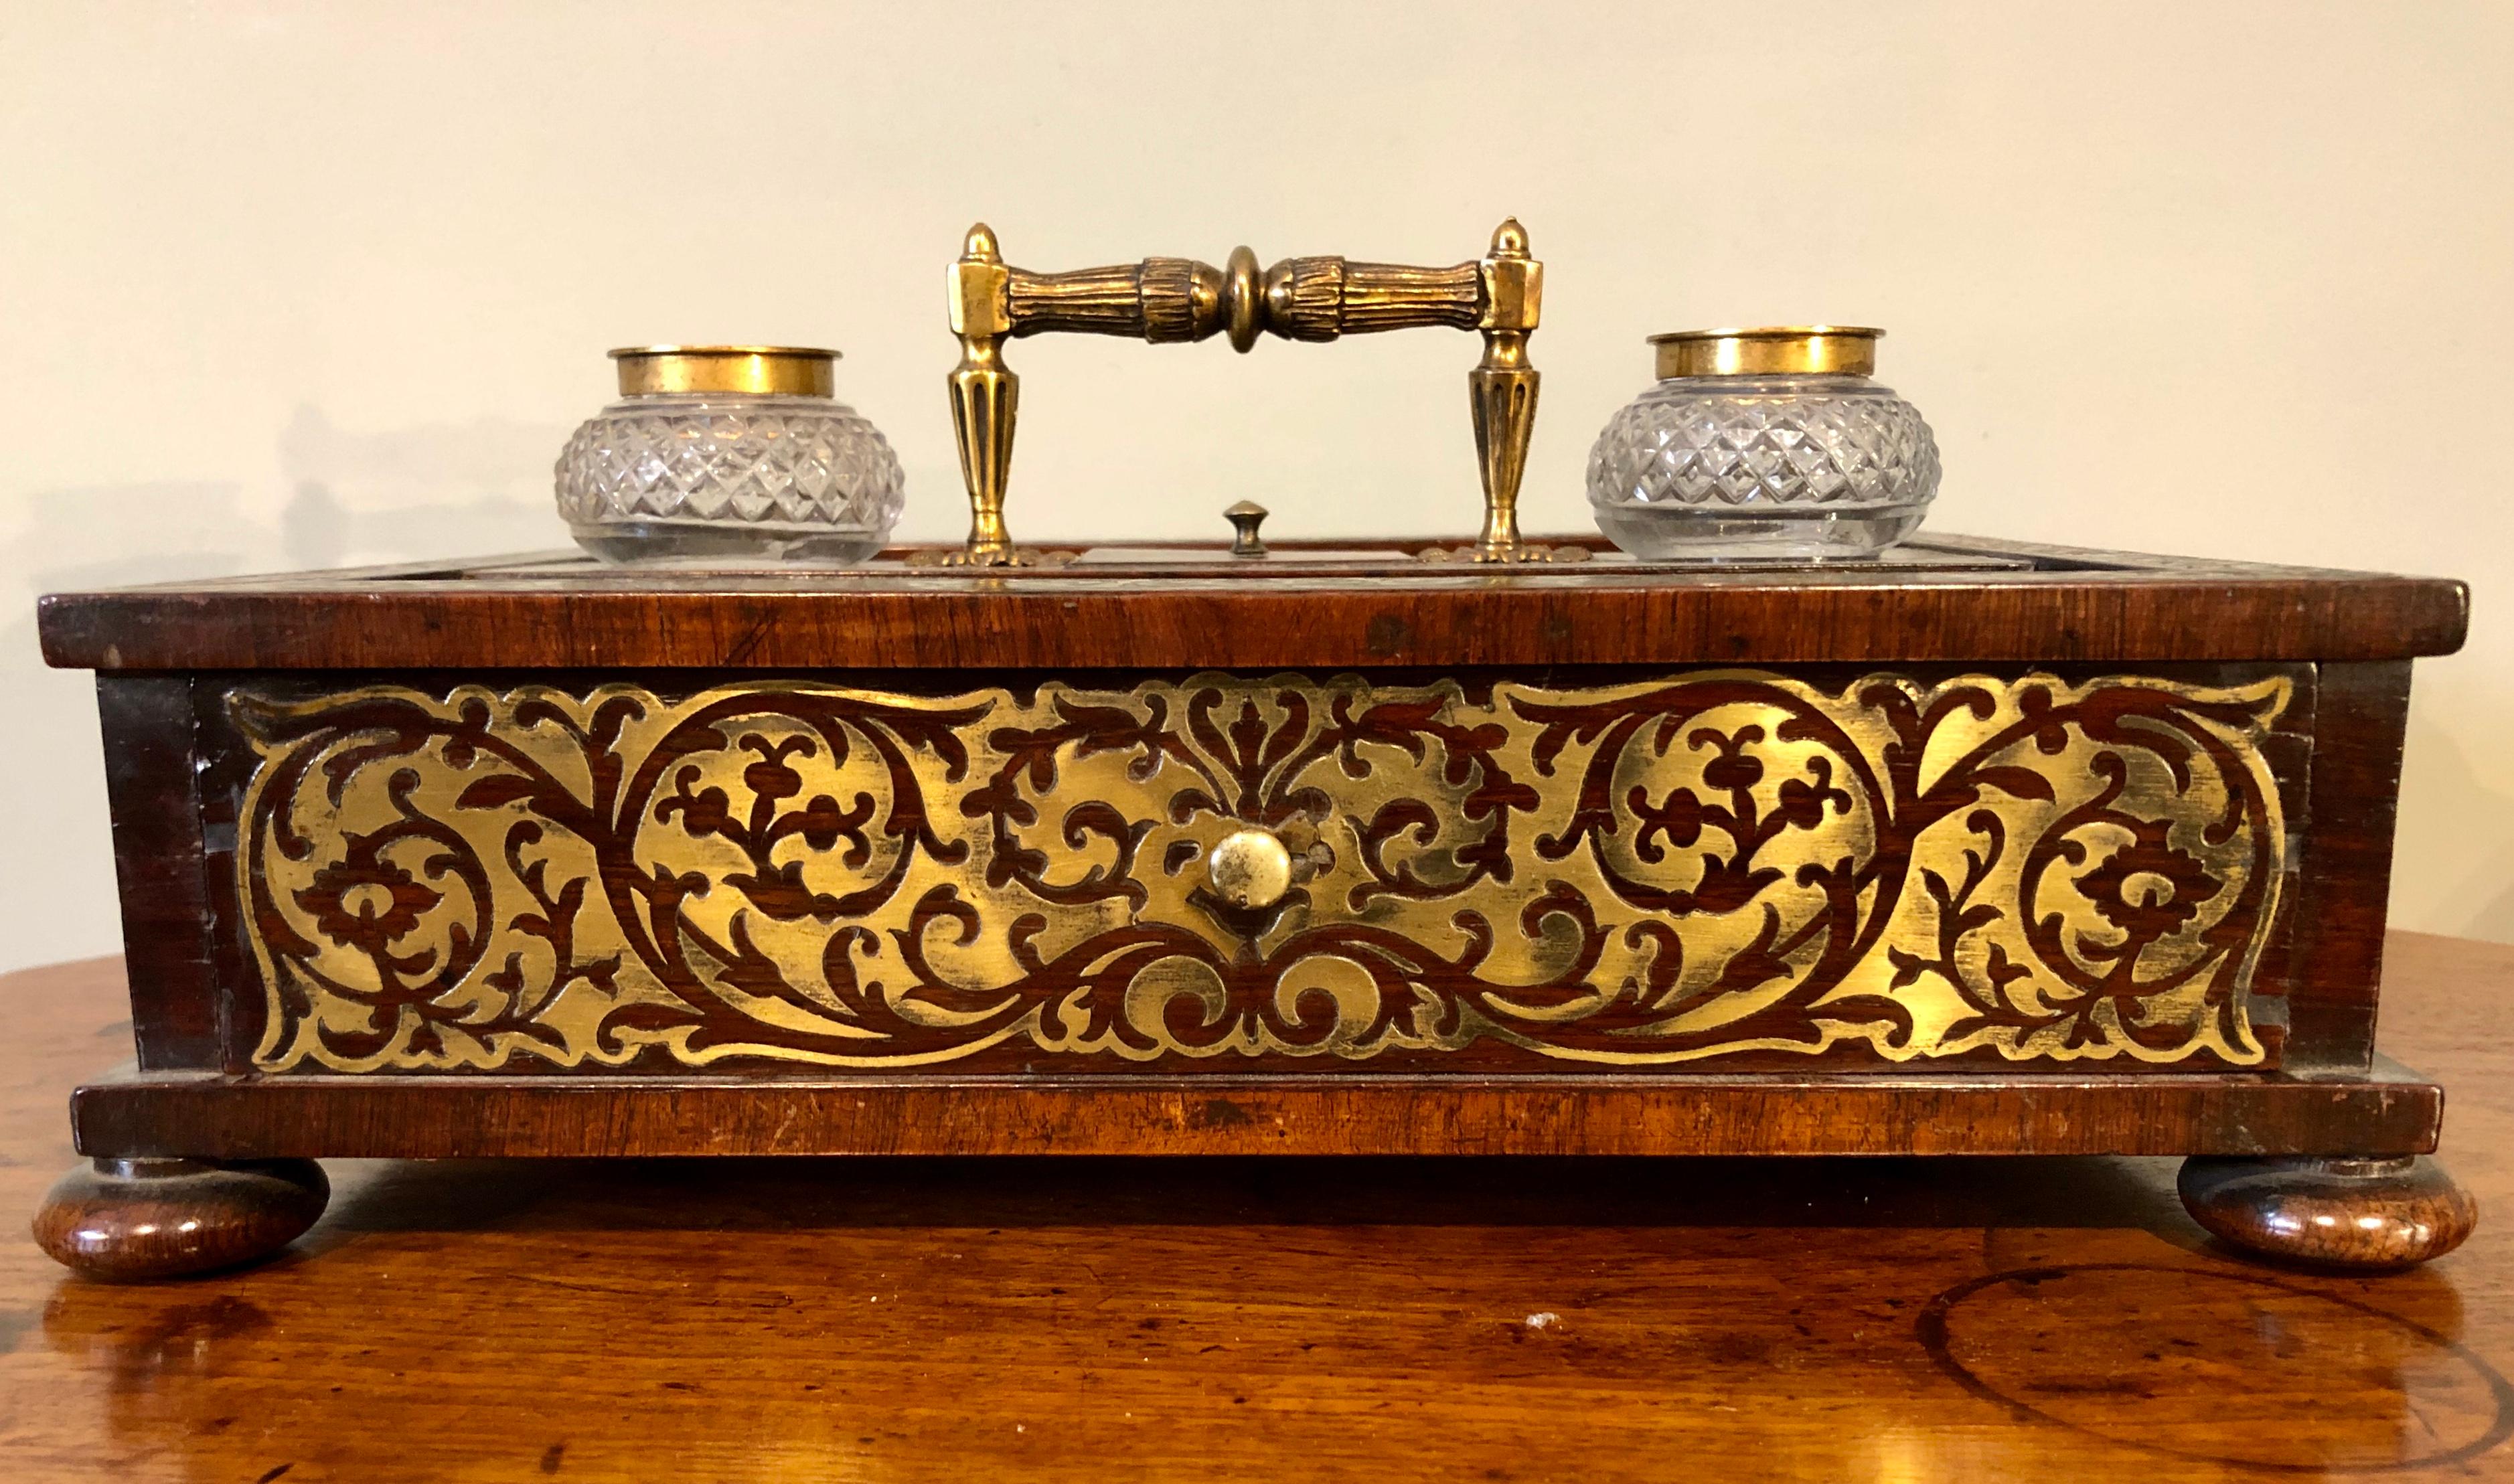 A very handsome Regency period brass inlaid rosewood pen and decoratively cut glass inkwell stand with large central letter drawer and small centre lidded compartment below the ornate brass handle with pen trays to each side. Standing on four small